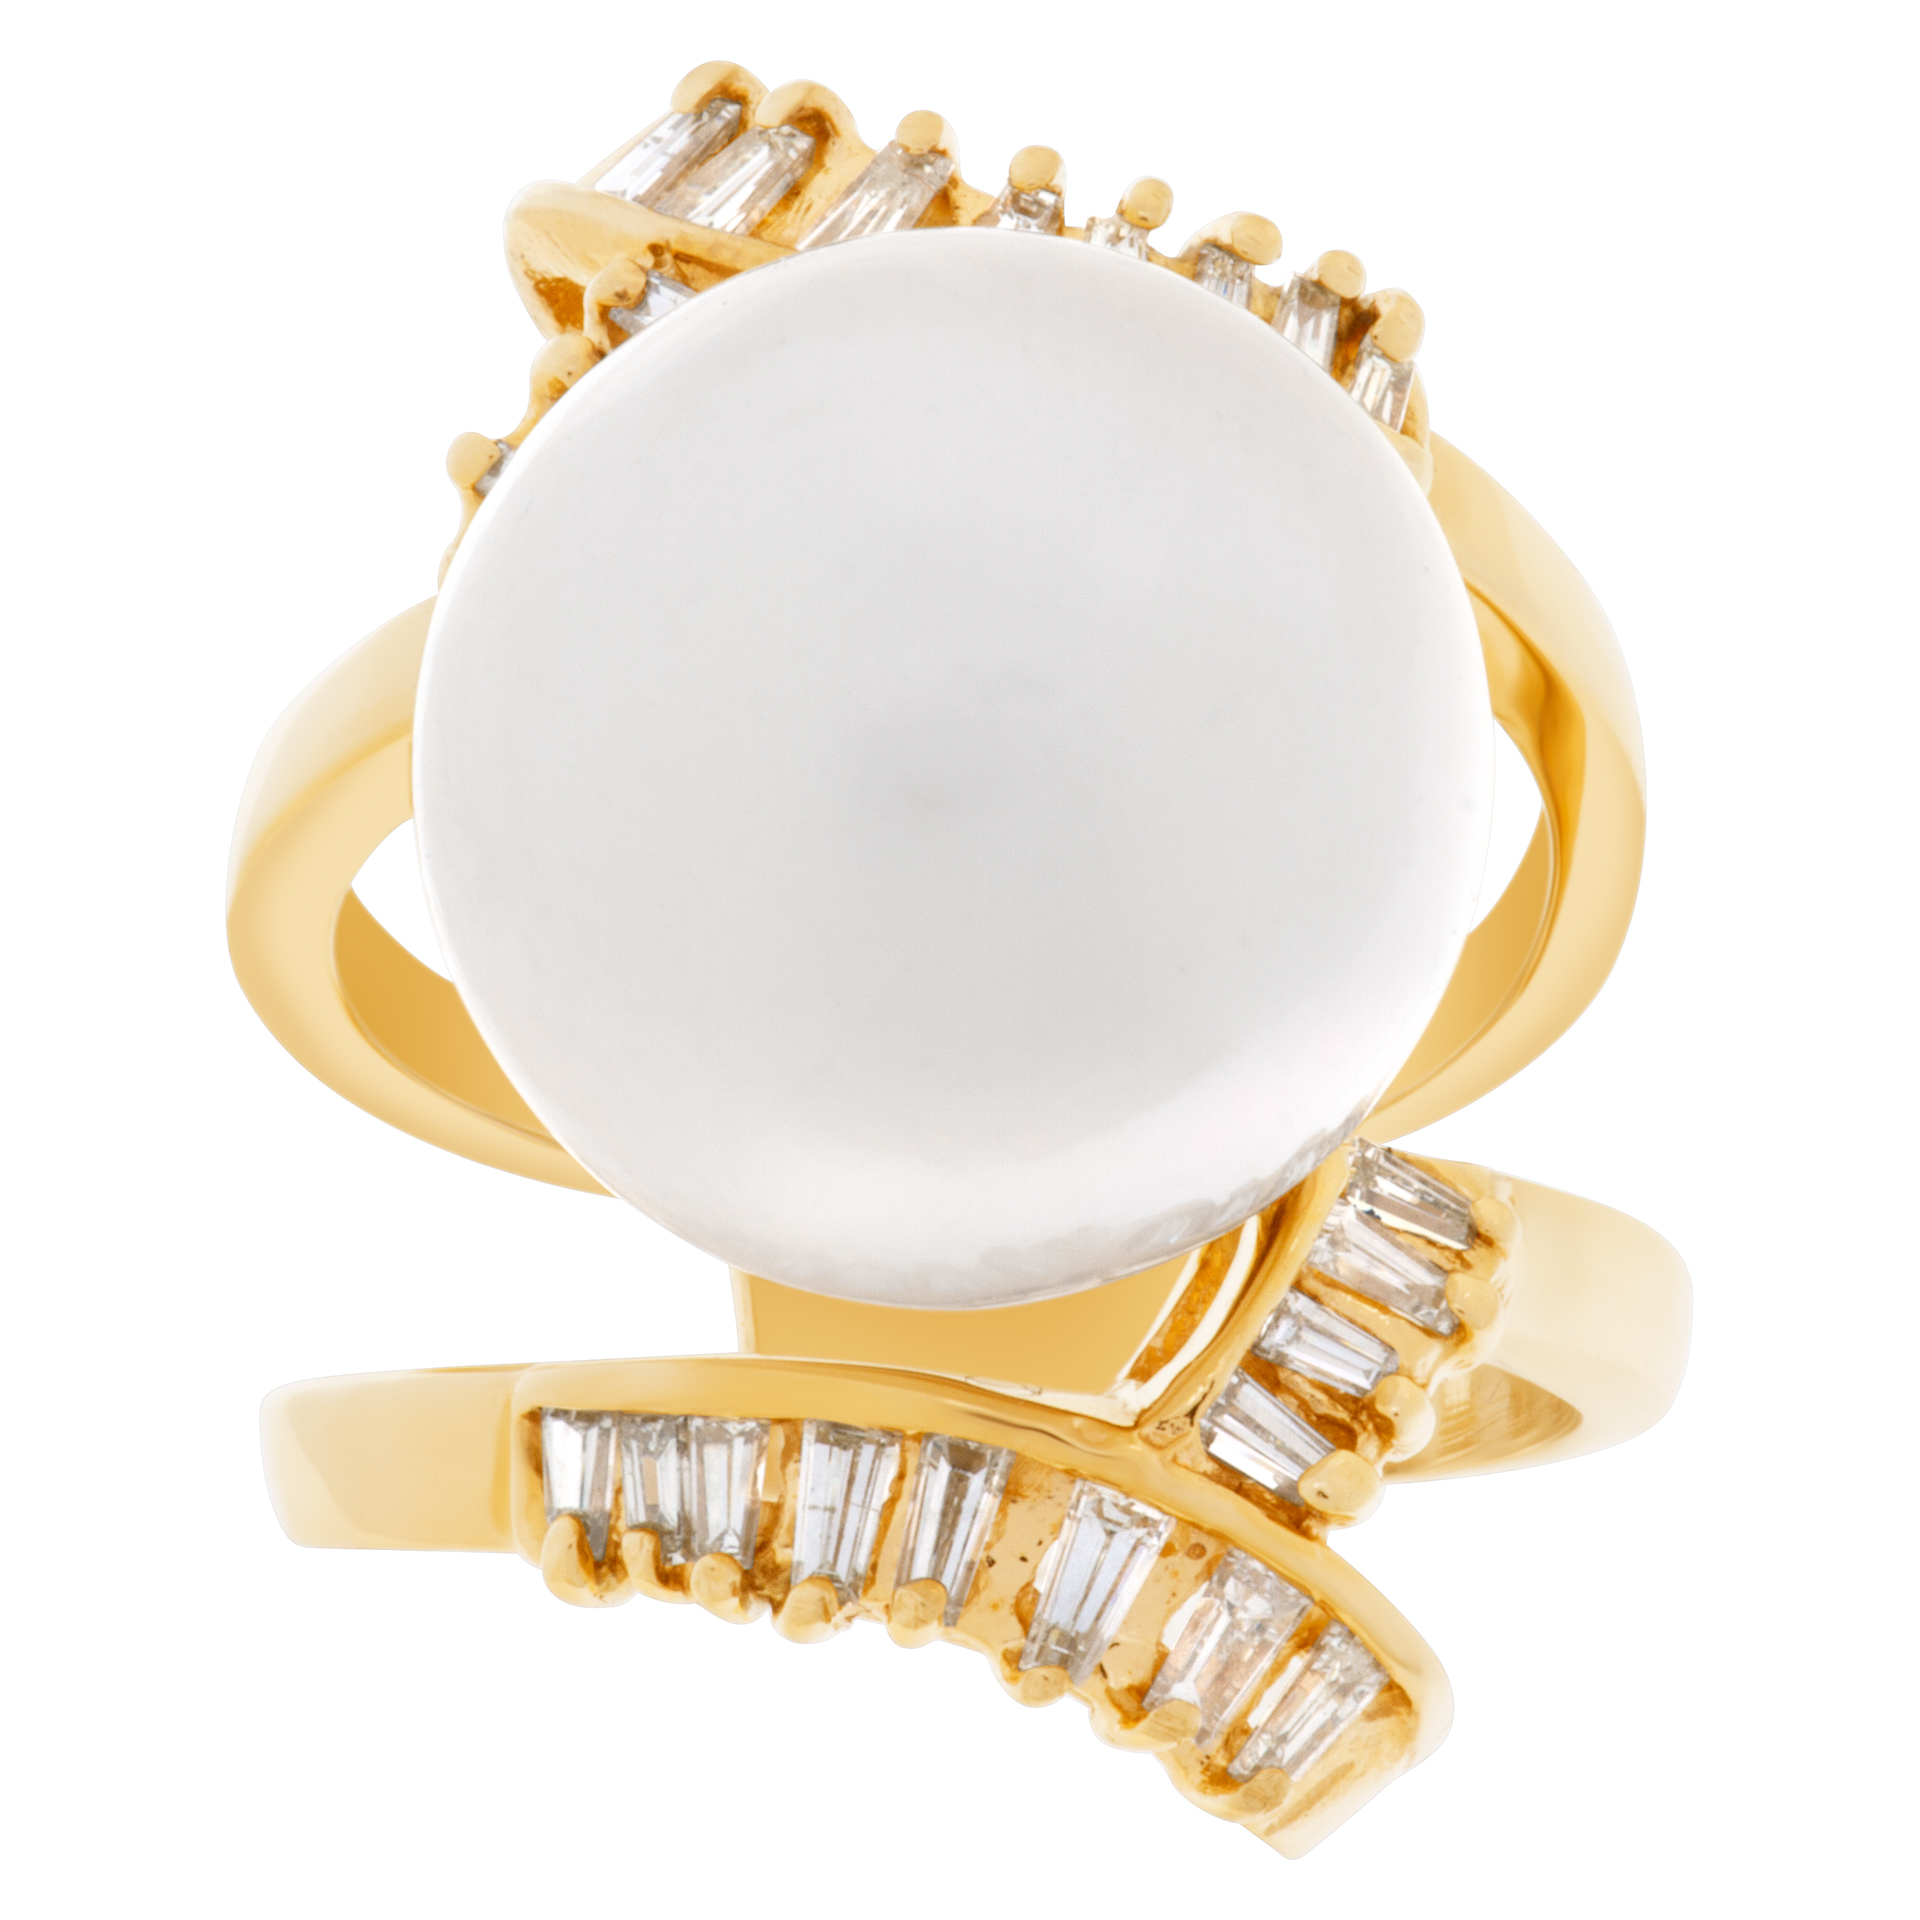 South Sea pearl ring in 18k yellow gold with diamond accents image 1